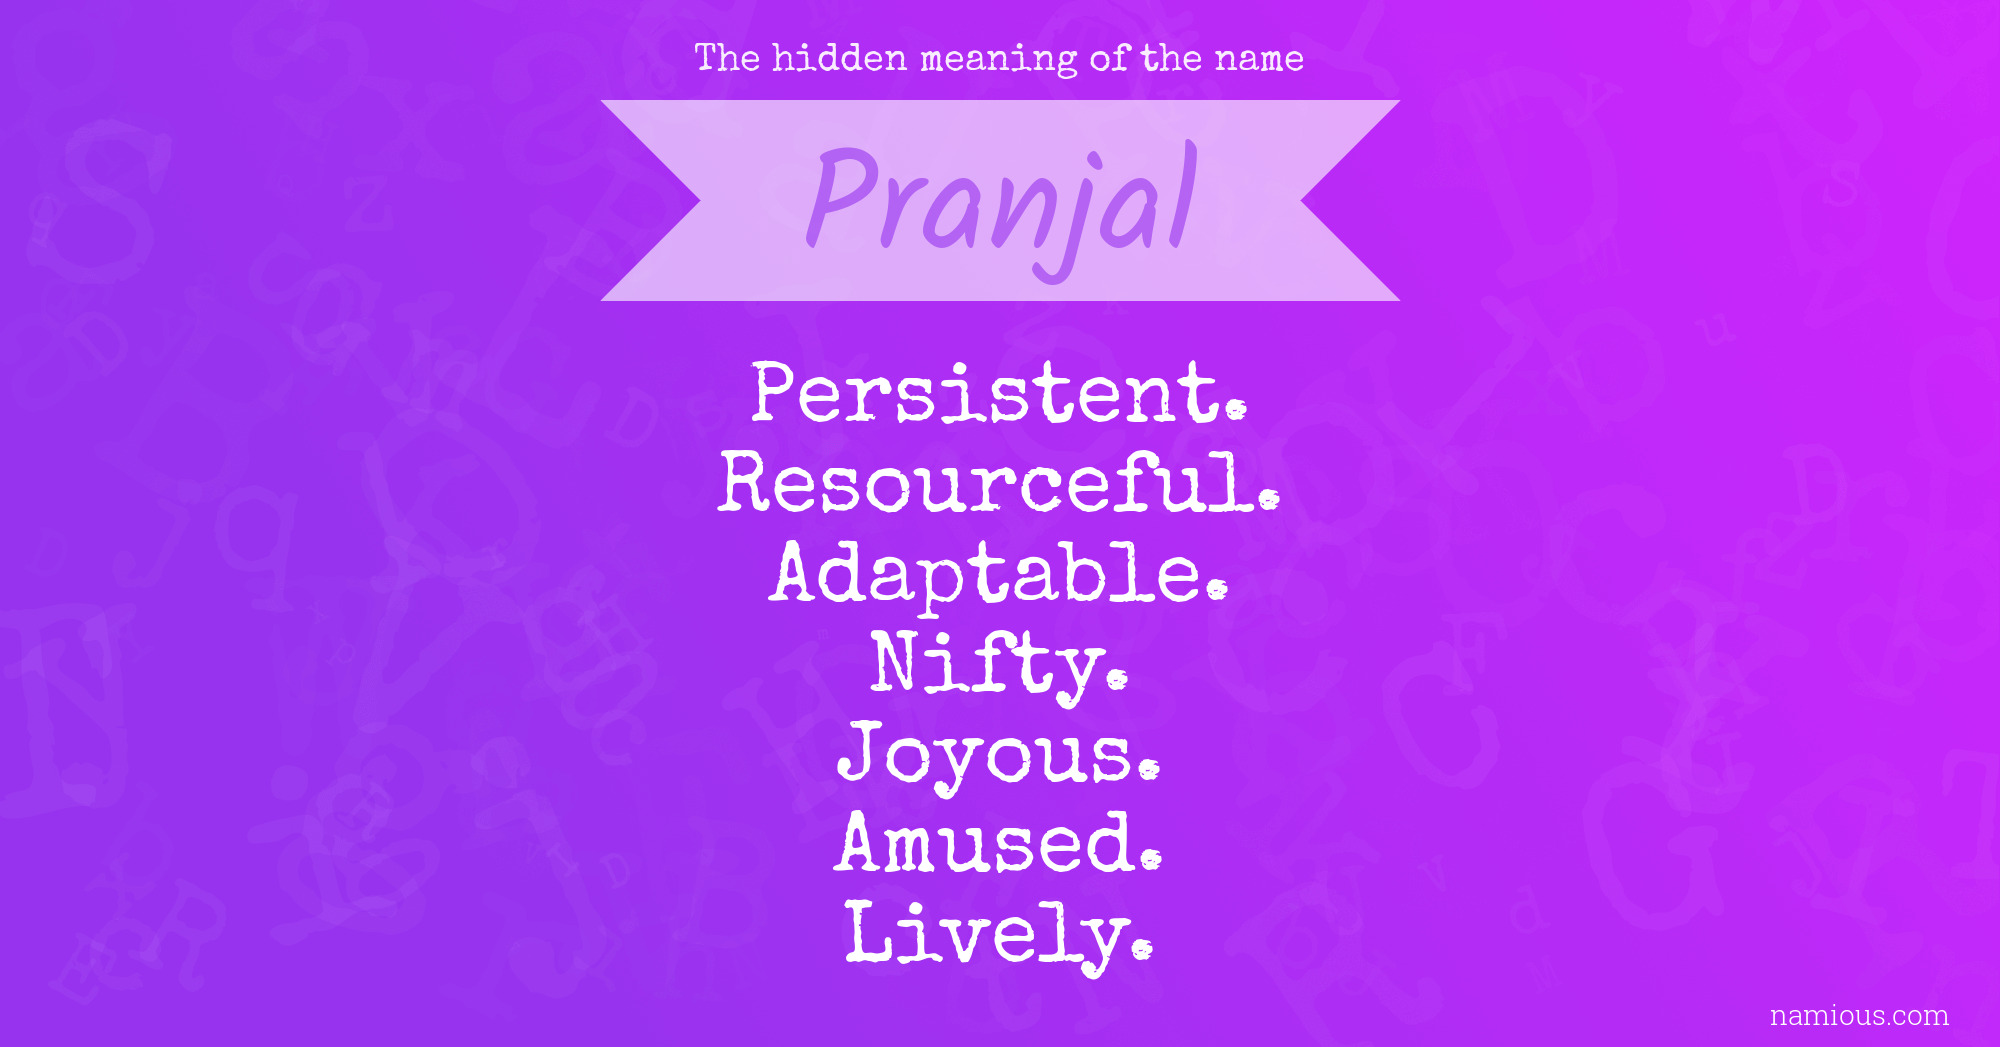 The hidden meaning of the name Pranjal